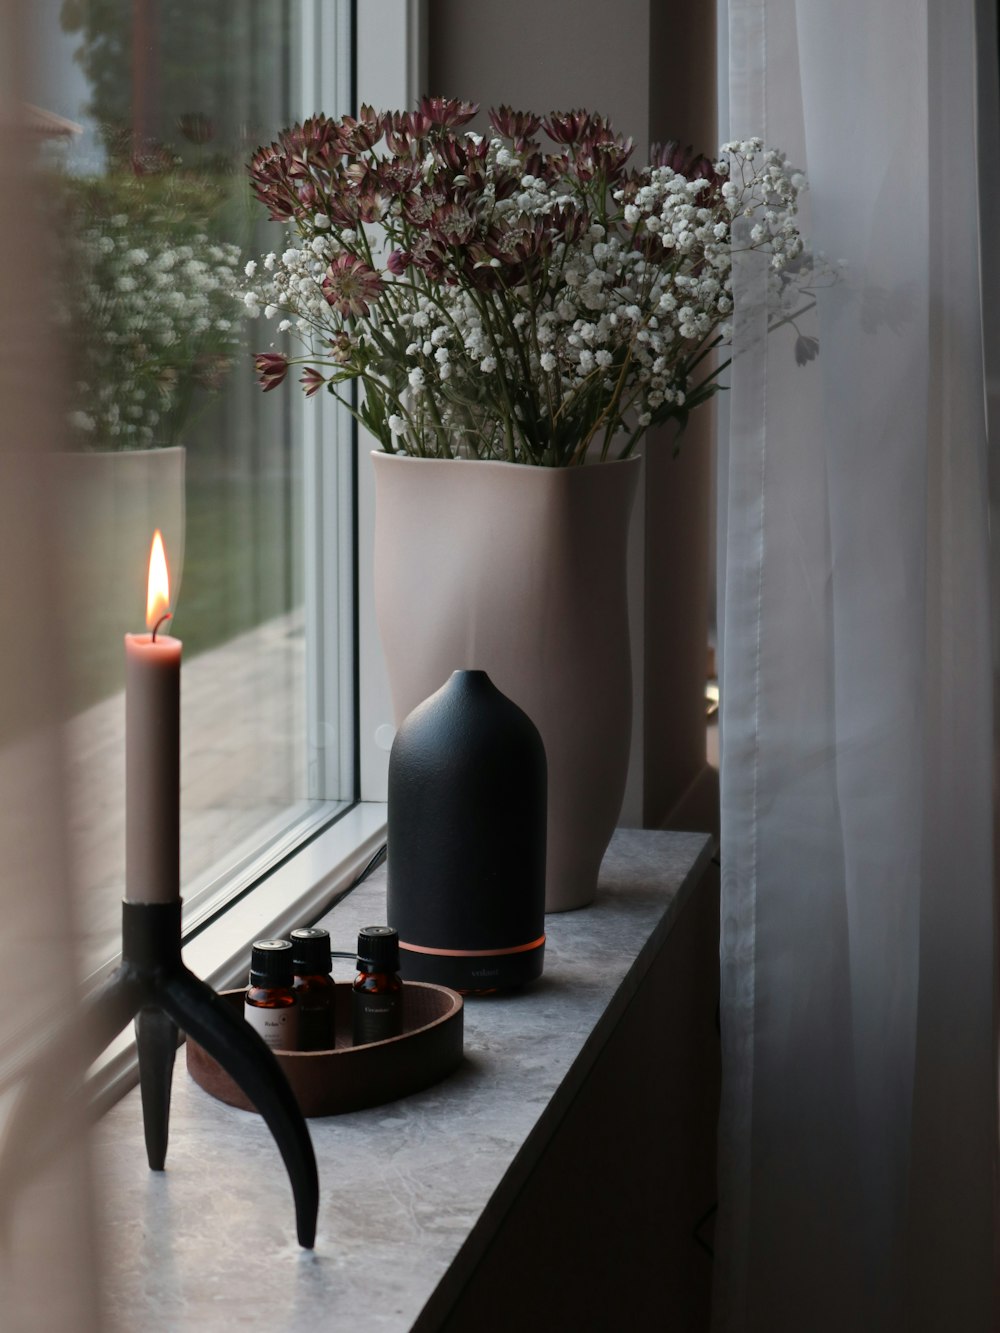 a vase with flowers and candles on a window sill